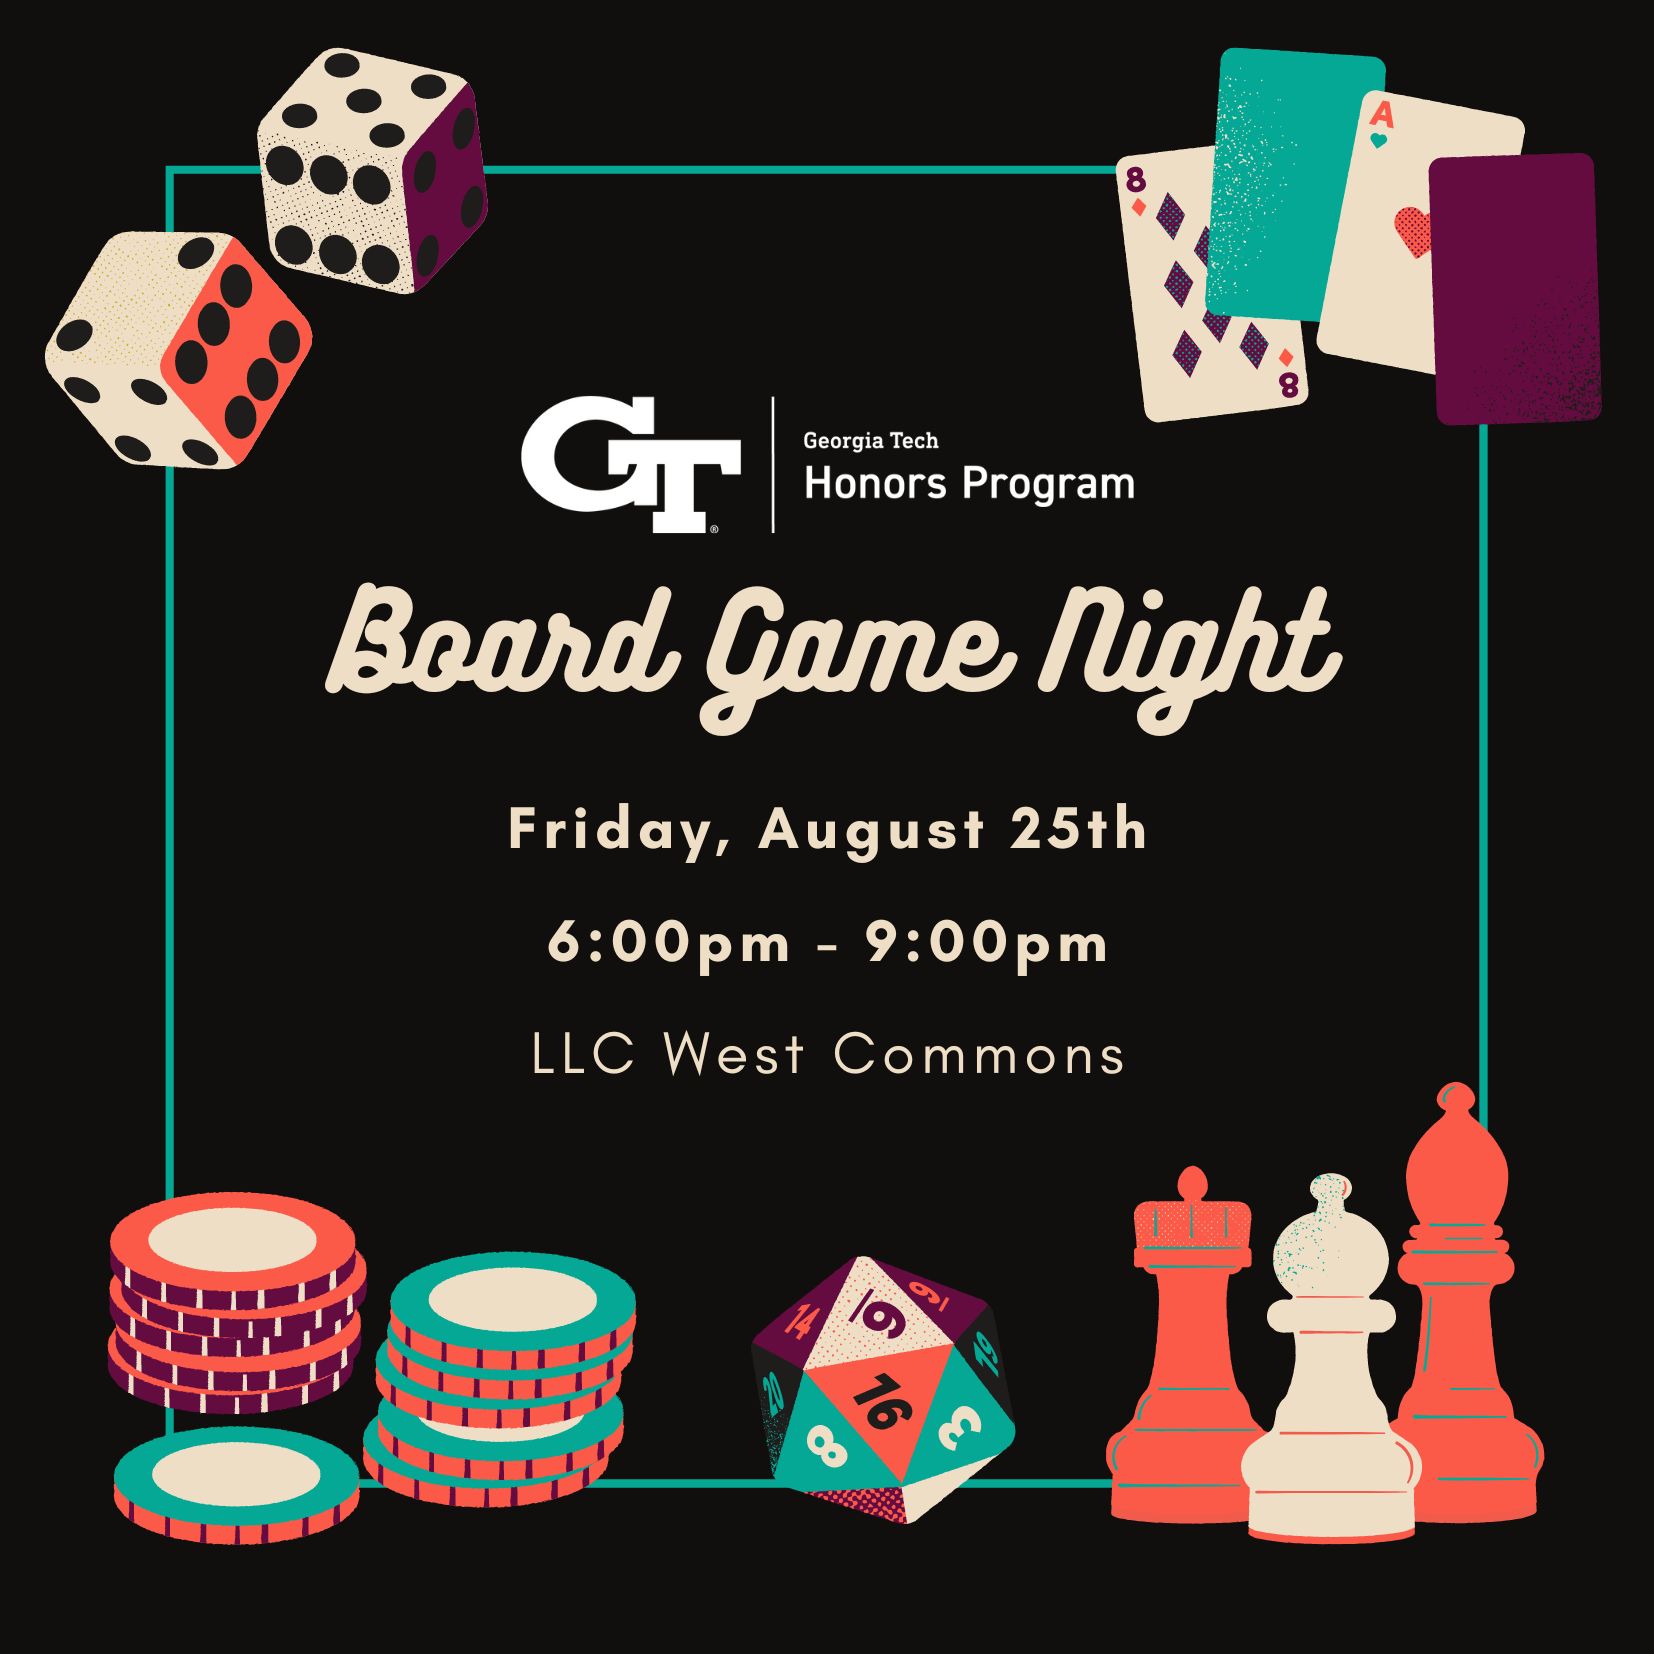 A graphic promoting the Honors Program Board Game Night on August 25th from 6pm to 9pm. The image shows various games like chess, poker chips and a deck of cards.&nbsp;
